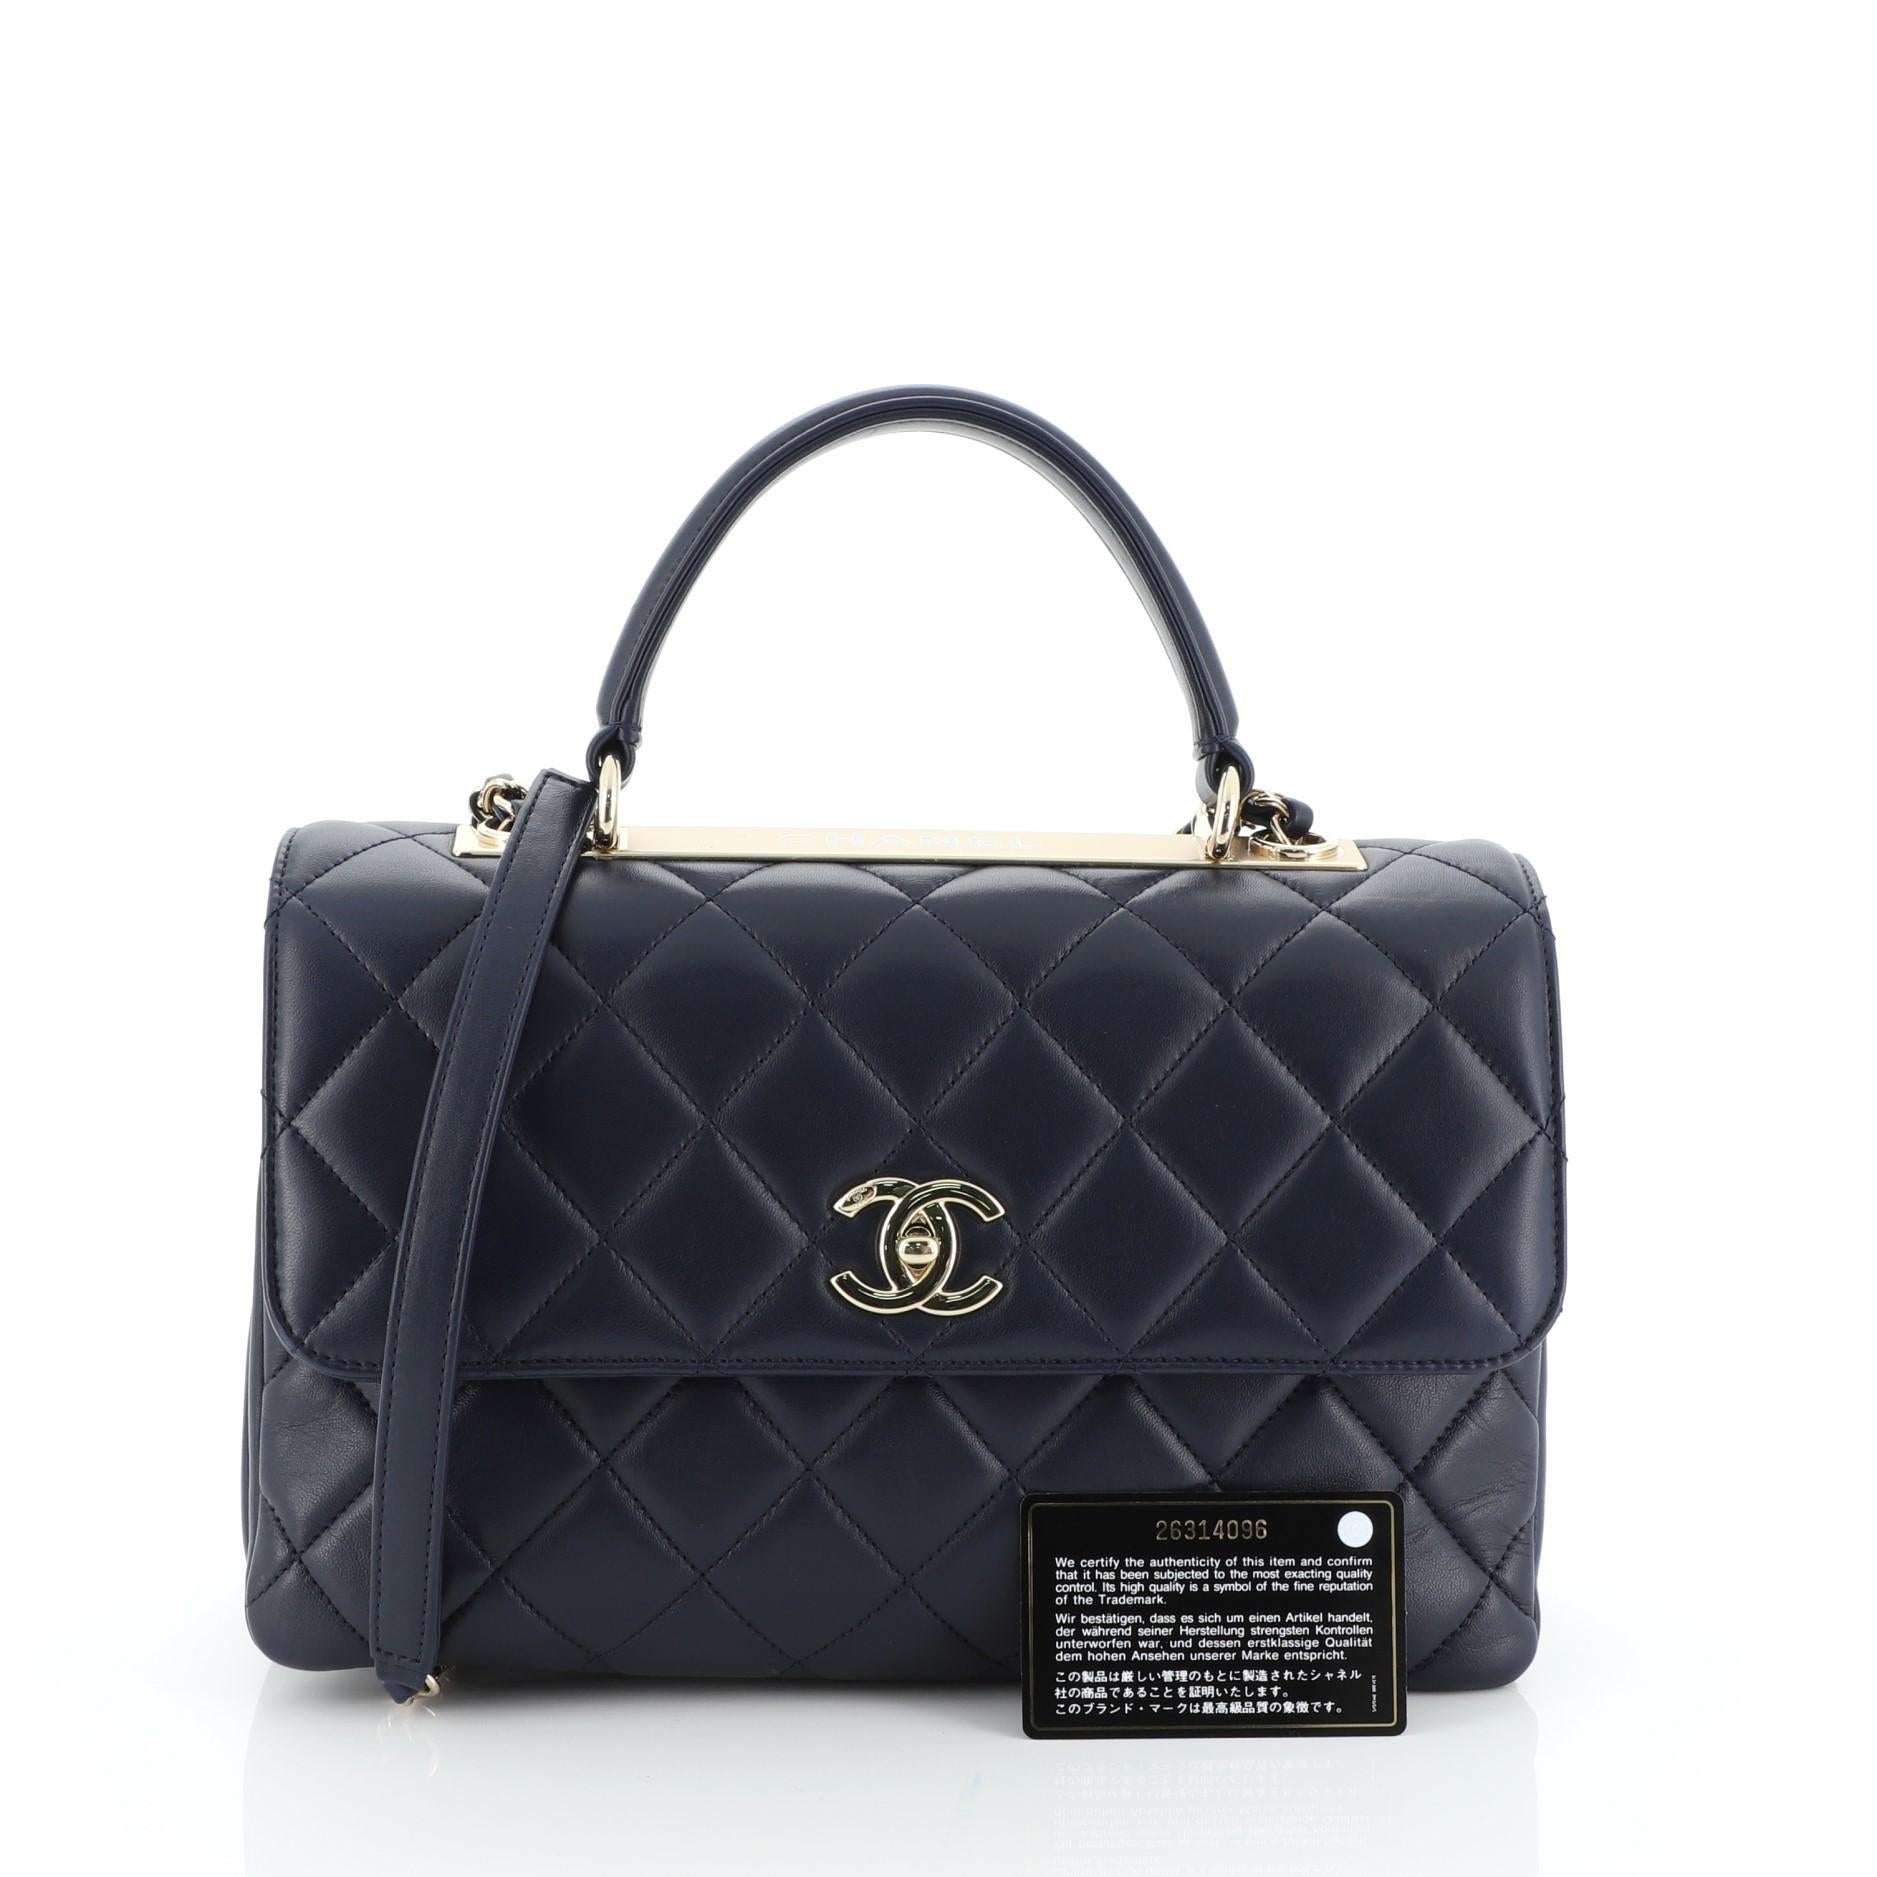 This Chanel Trendy CC Top Handle Bag Quilted Lambskin Medium, crafted from blue quilted lambskin, features a leather top handle, woven-in leather chain strap with leather pad, and gold-tone hardware. Its turn-lock closure opens to a blue leather